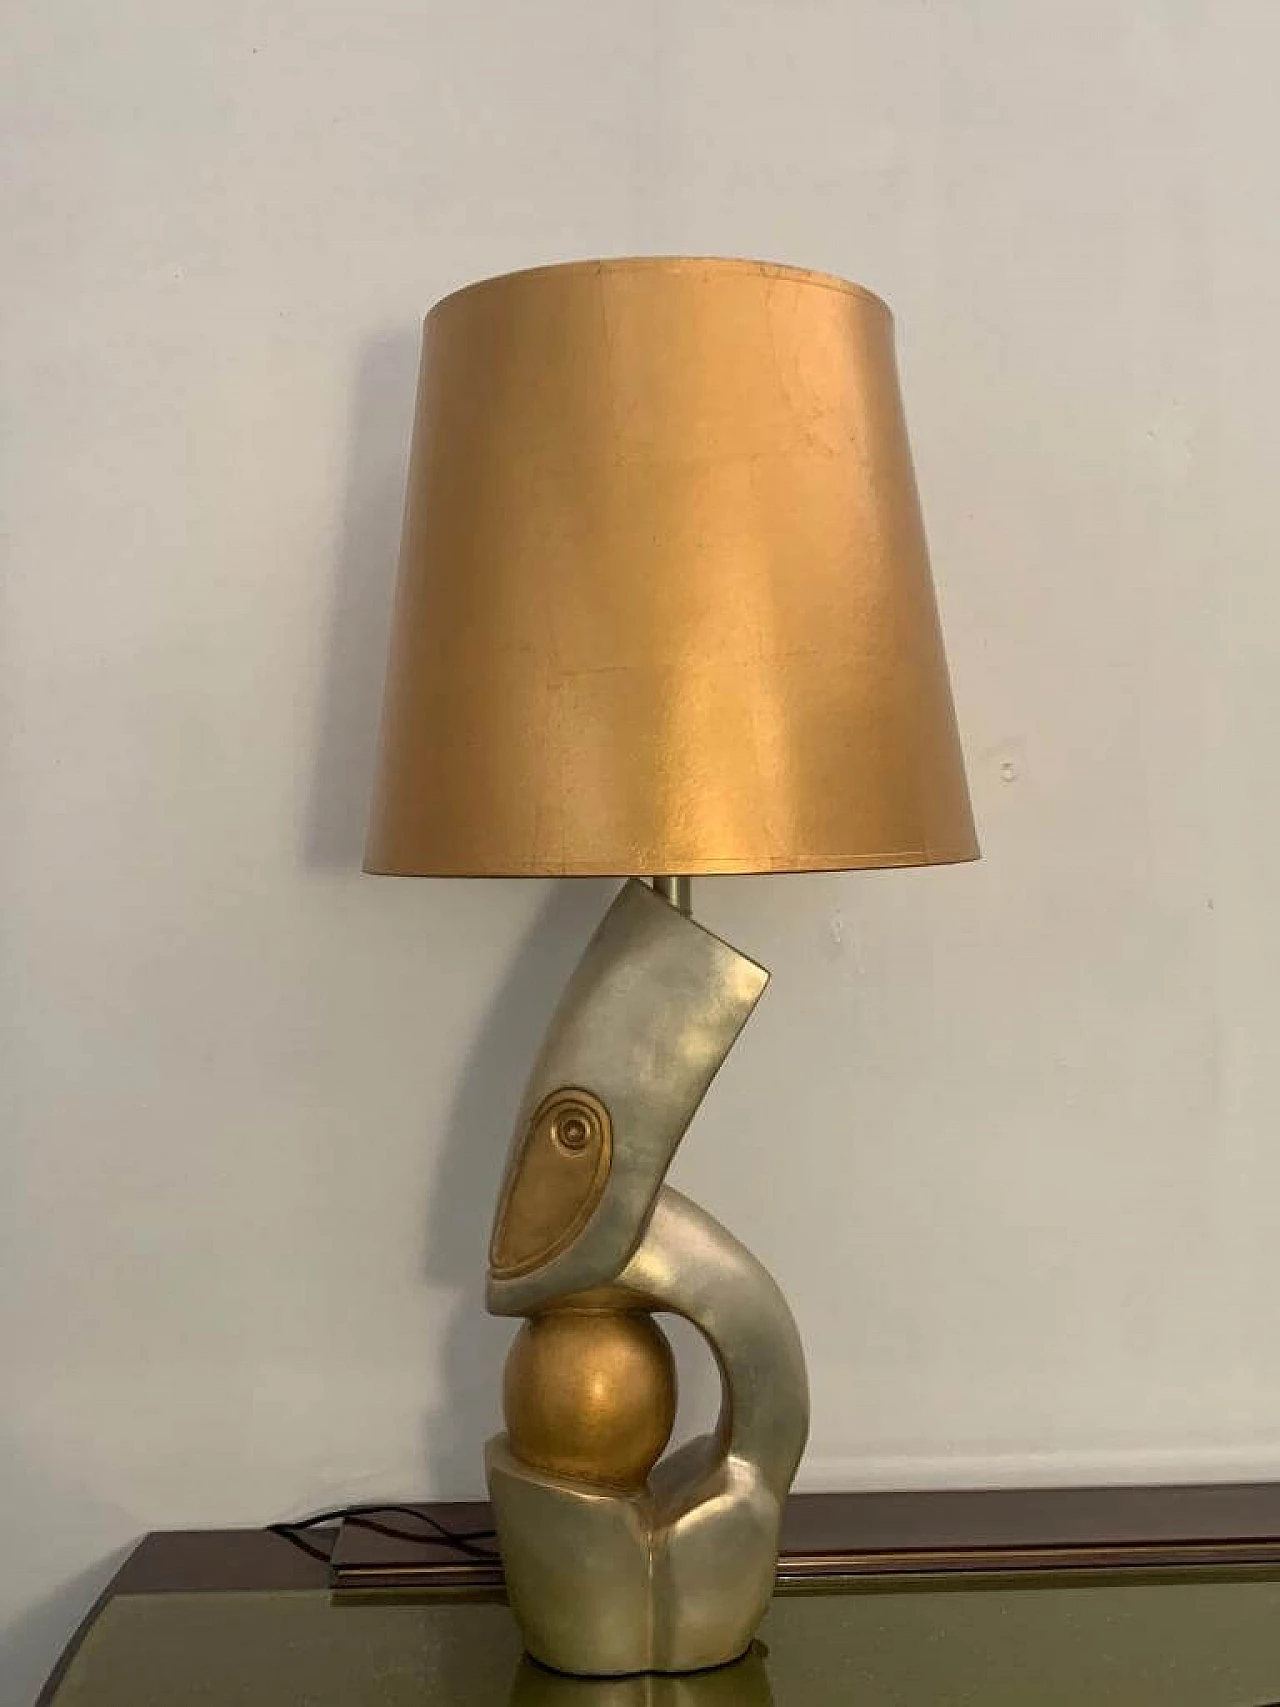 George table lamp by Leeazane for Lam Lee Group Dallas, 1990s 1197681